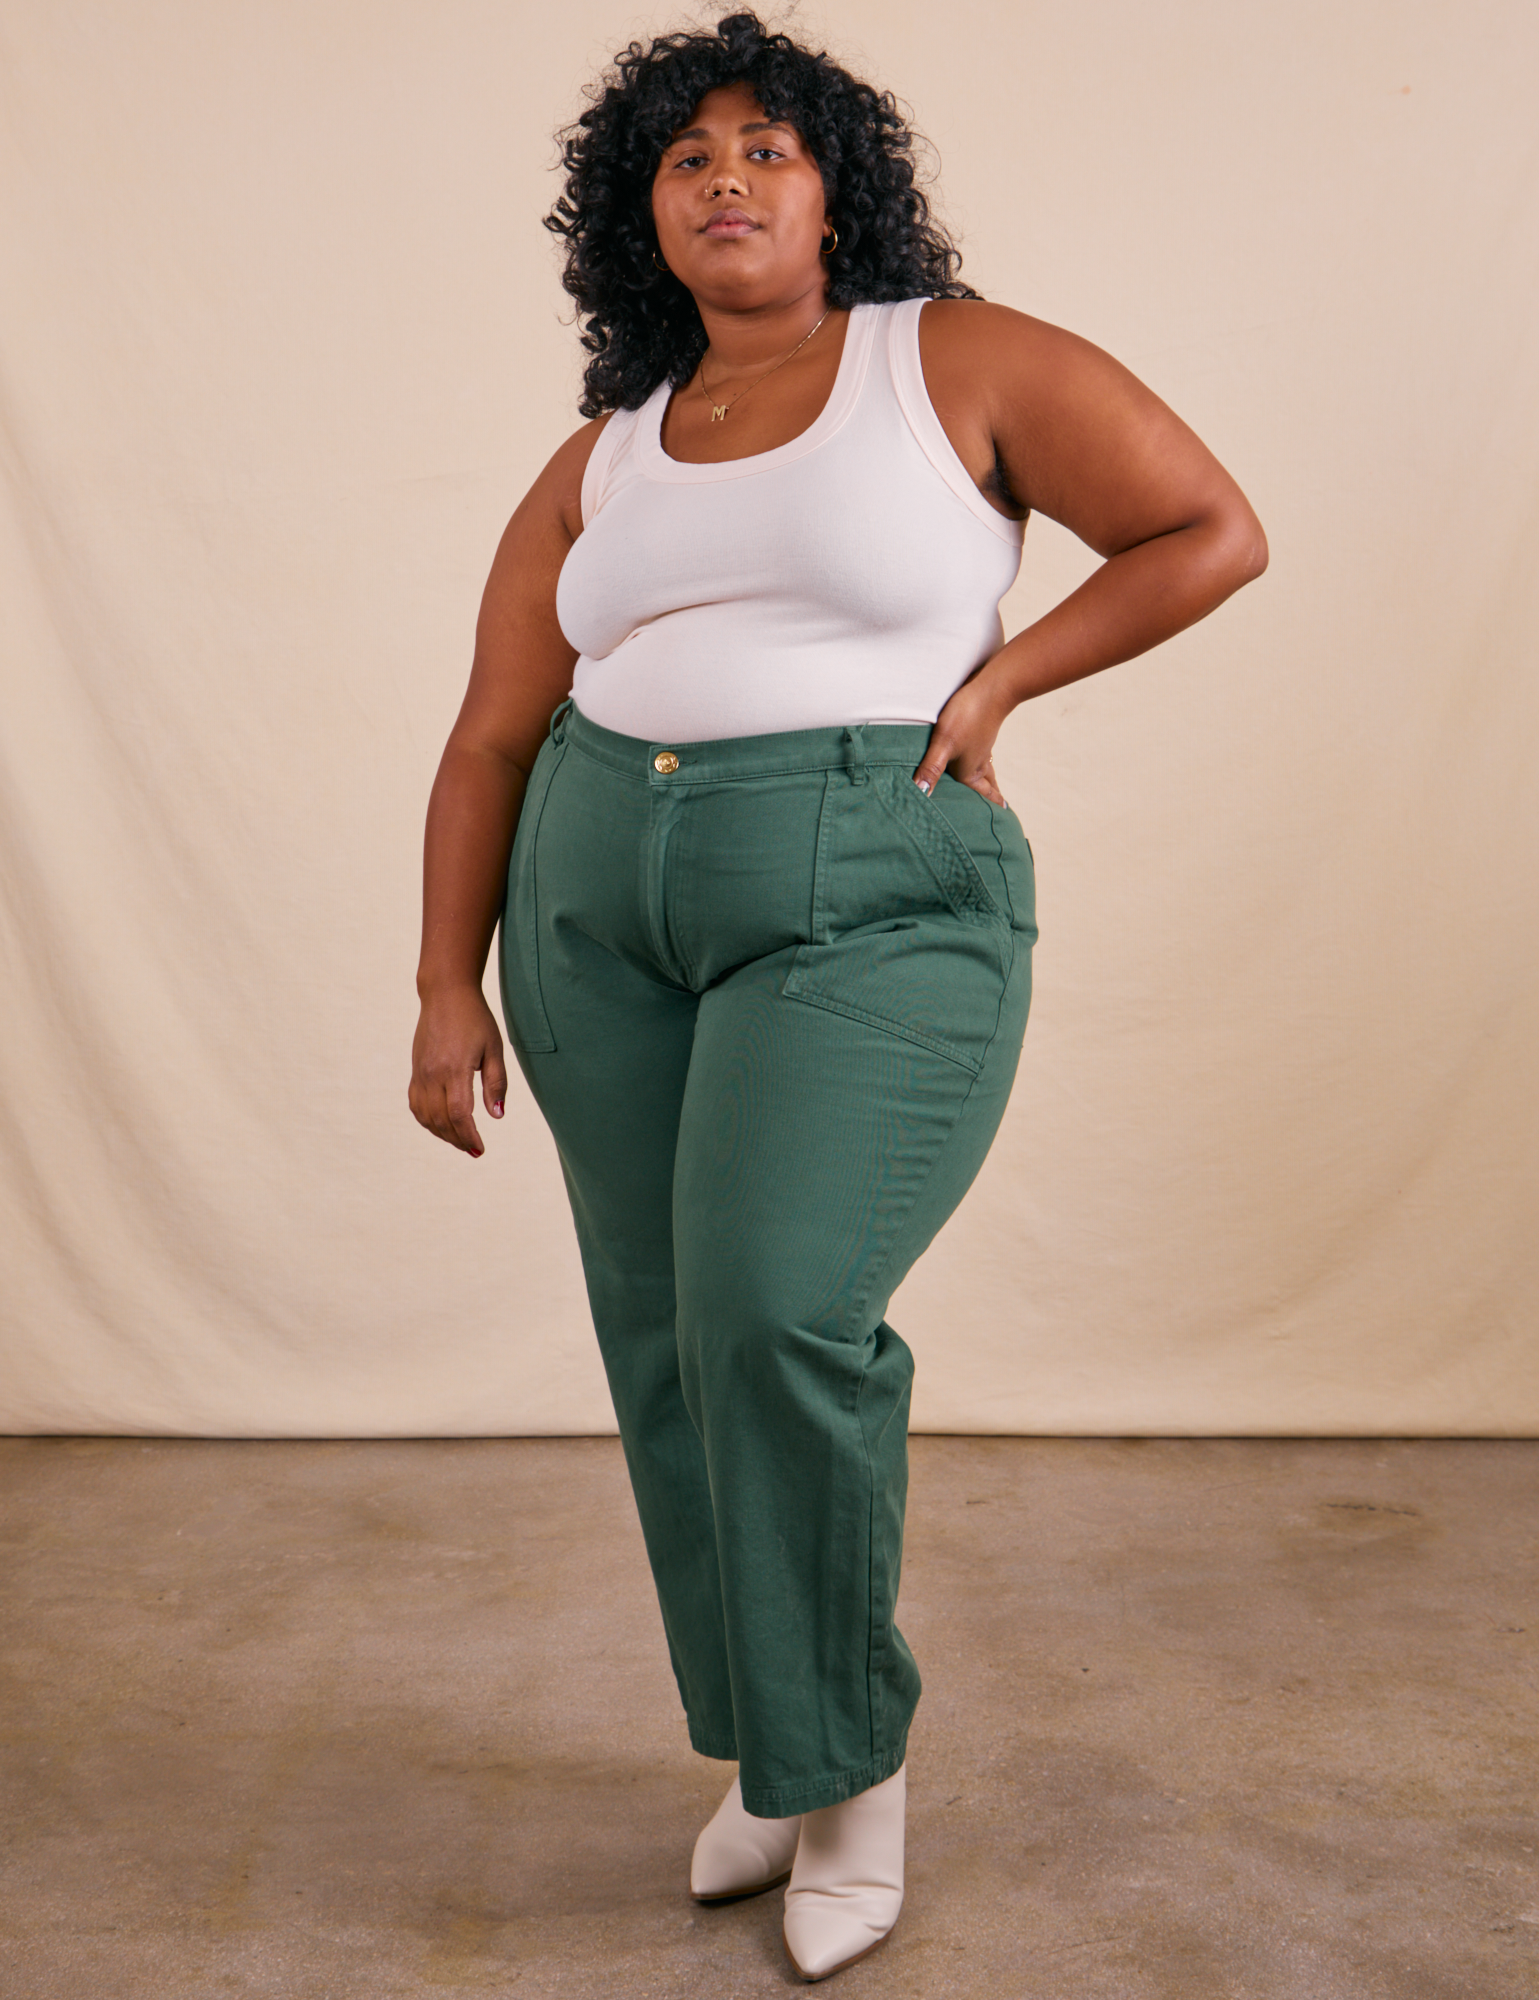 Morgan is 5&#39;5&quot; and wearing 3XL Work Pants in Dark Emerald Green paired with vintage off-white Tank Top